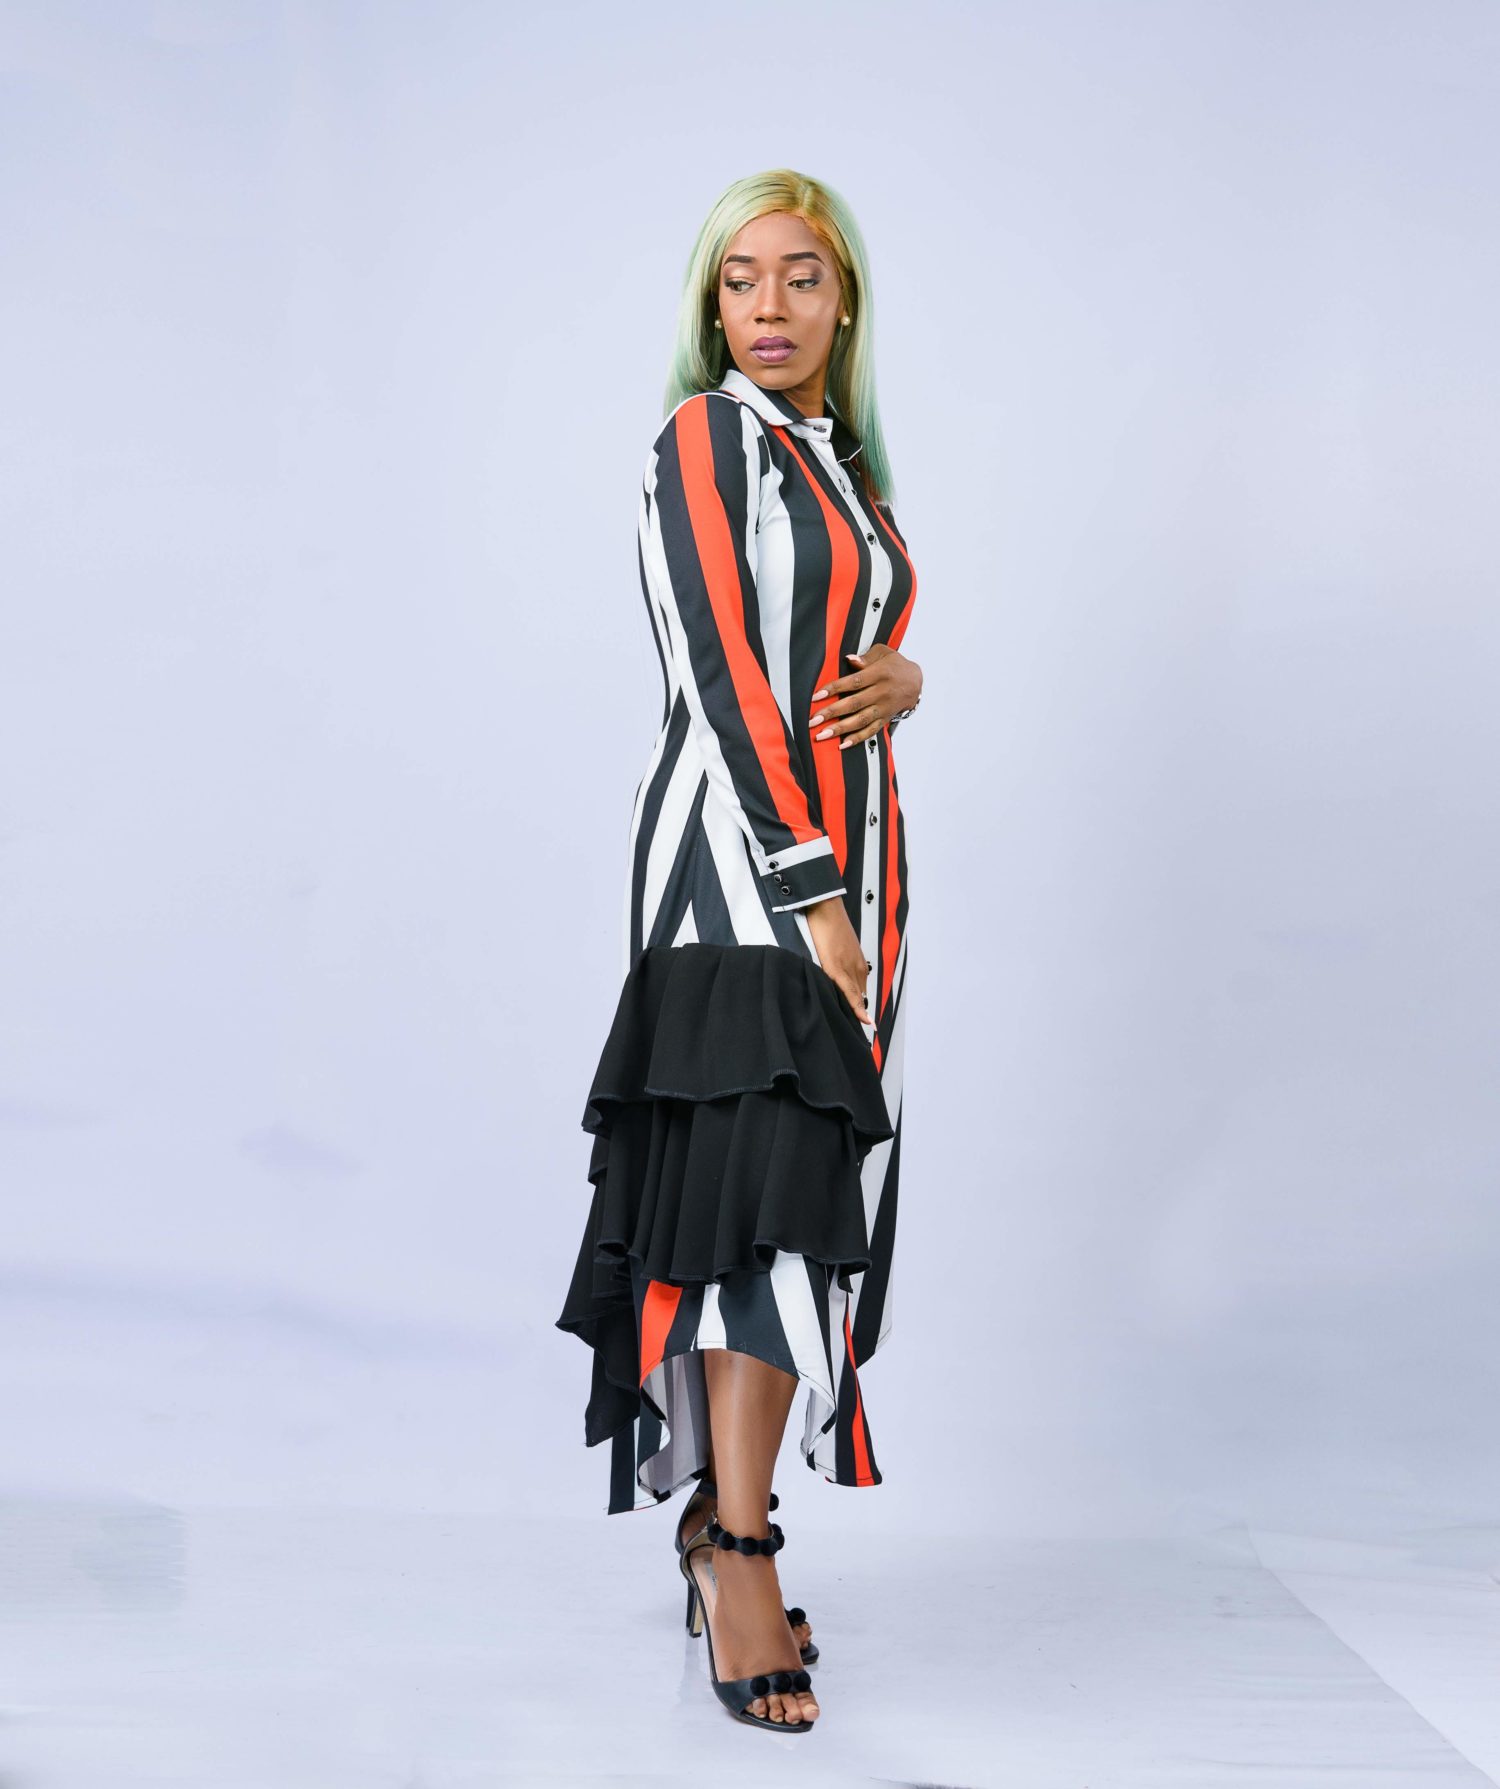 Trish O Couture’s Latest Collection Will Resonate With Stylish Women Everywhere!